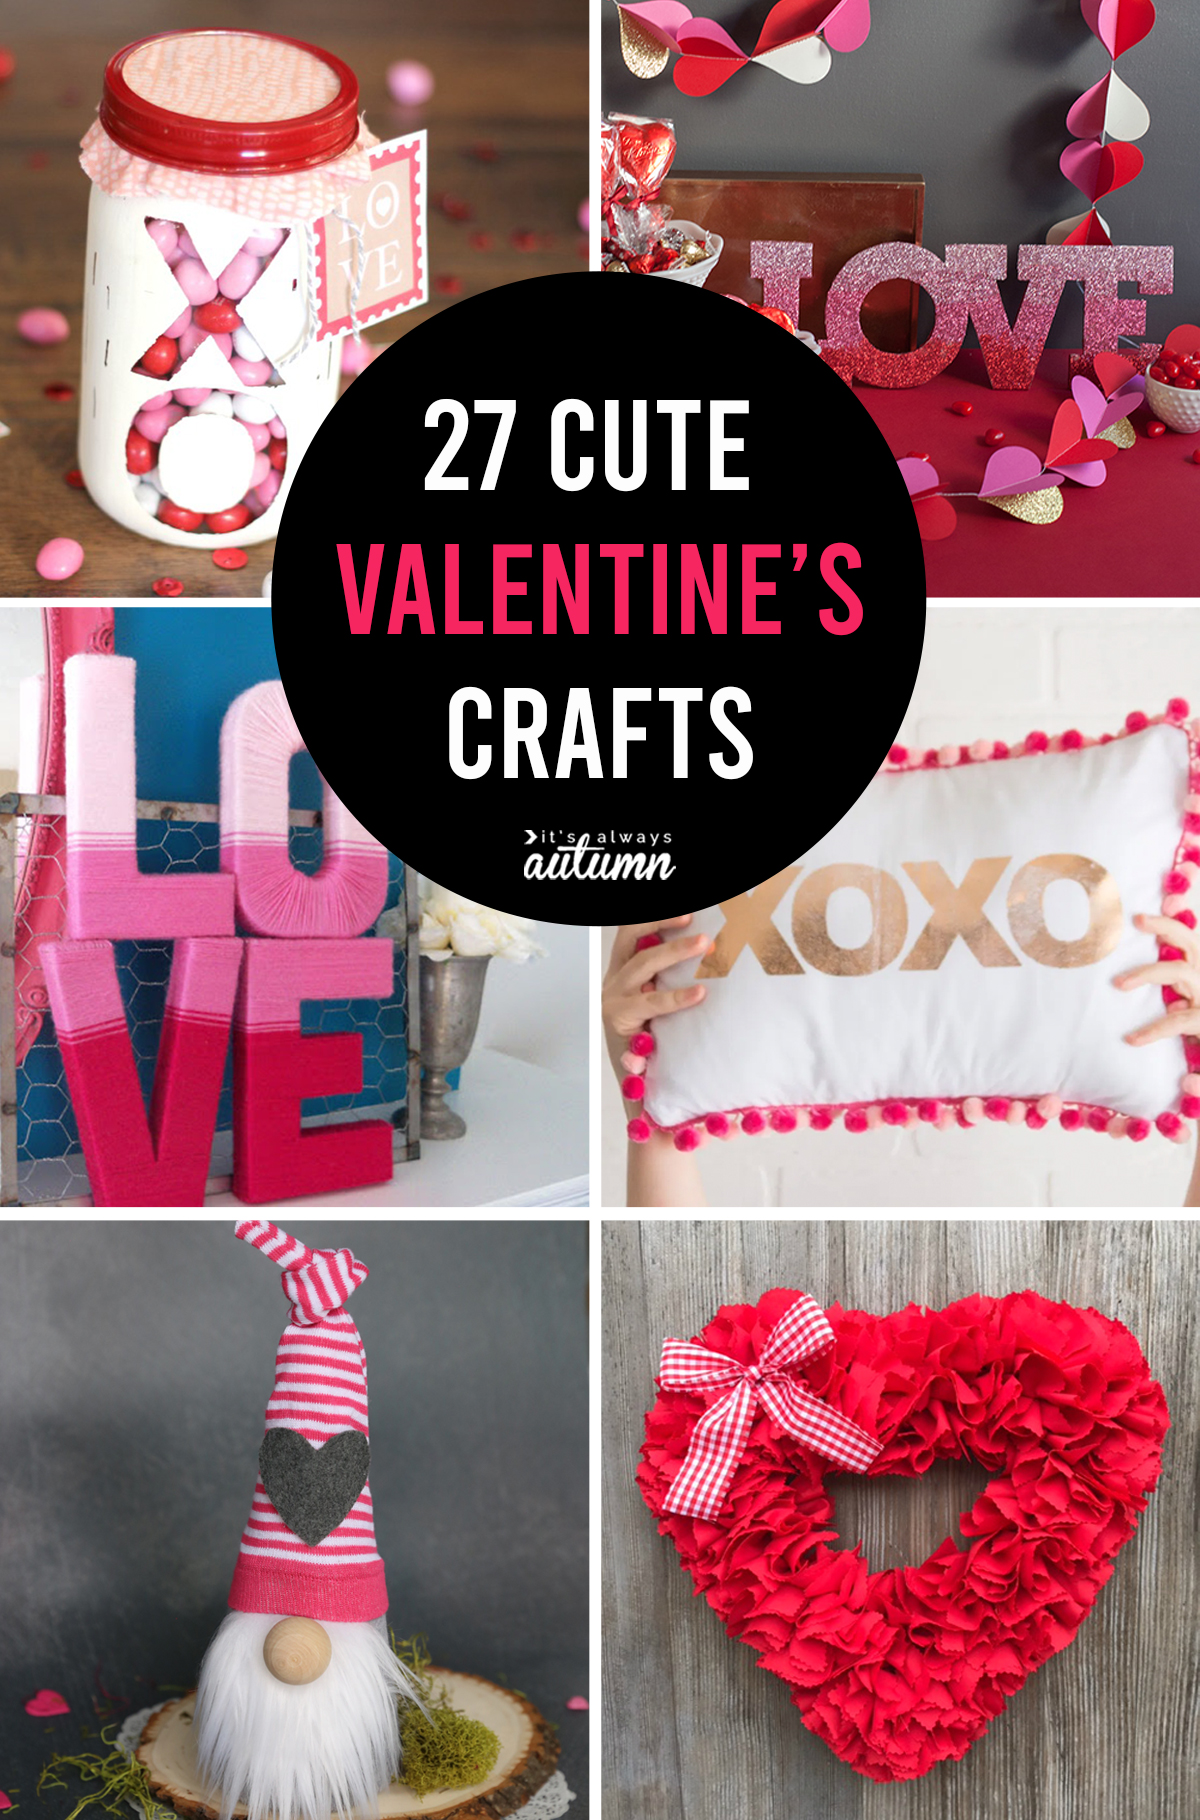 Heart Shaped Valentine Bee Craft for Kids - Crafty Morning